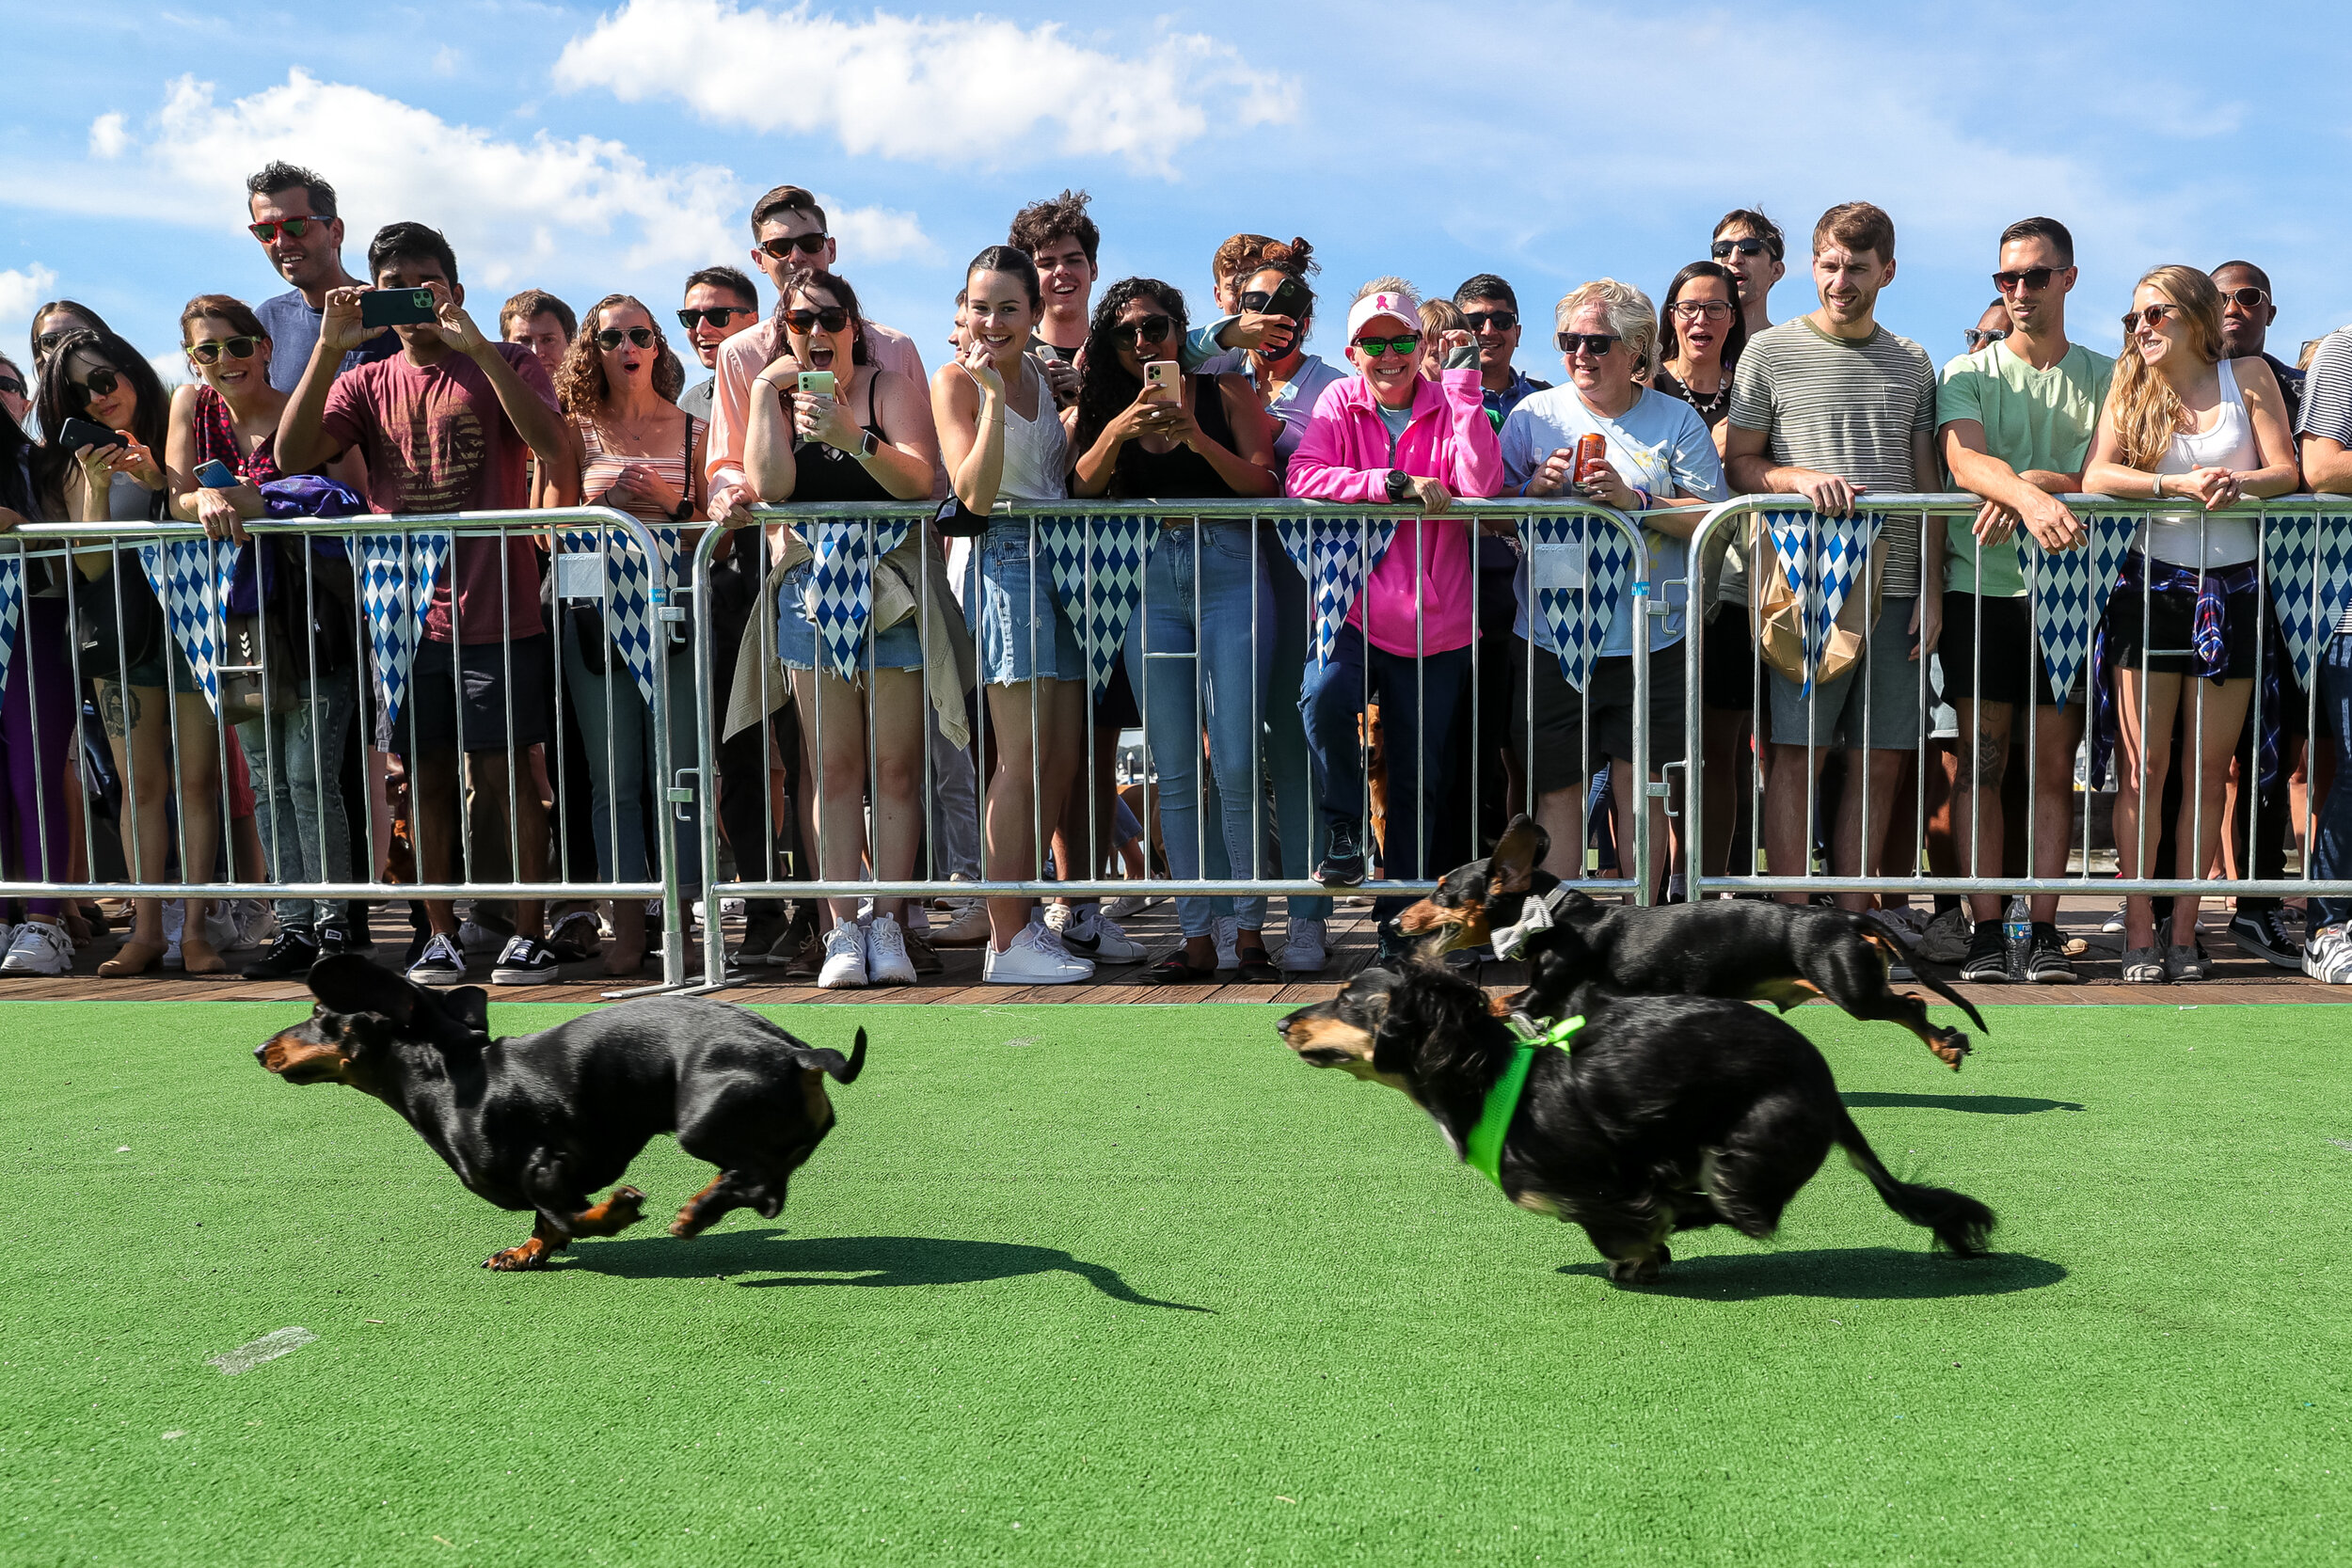  Spectators take in the Wiener 500 Dachshund Dash during Oktoberfest at The Wharf on Saturday, Oct. 2, 2021.  